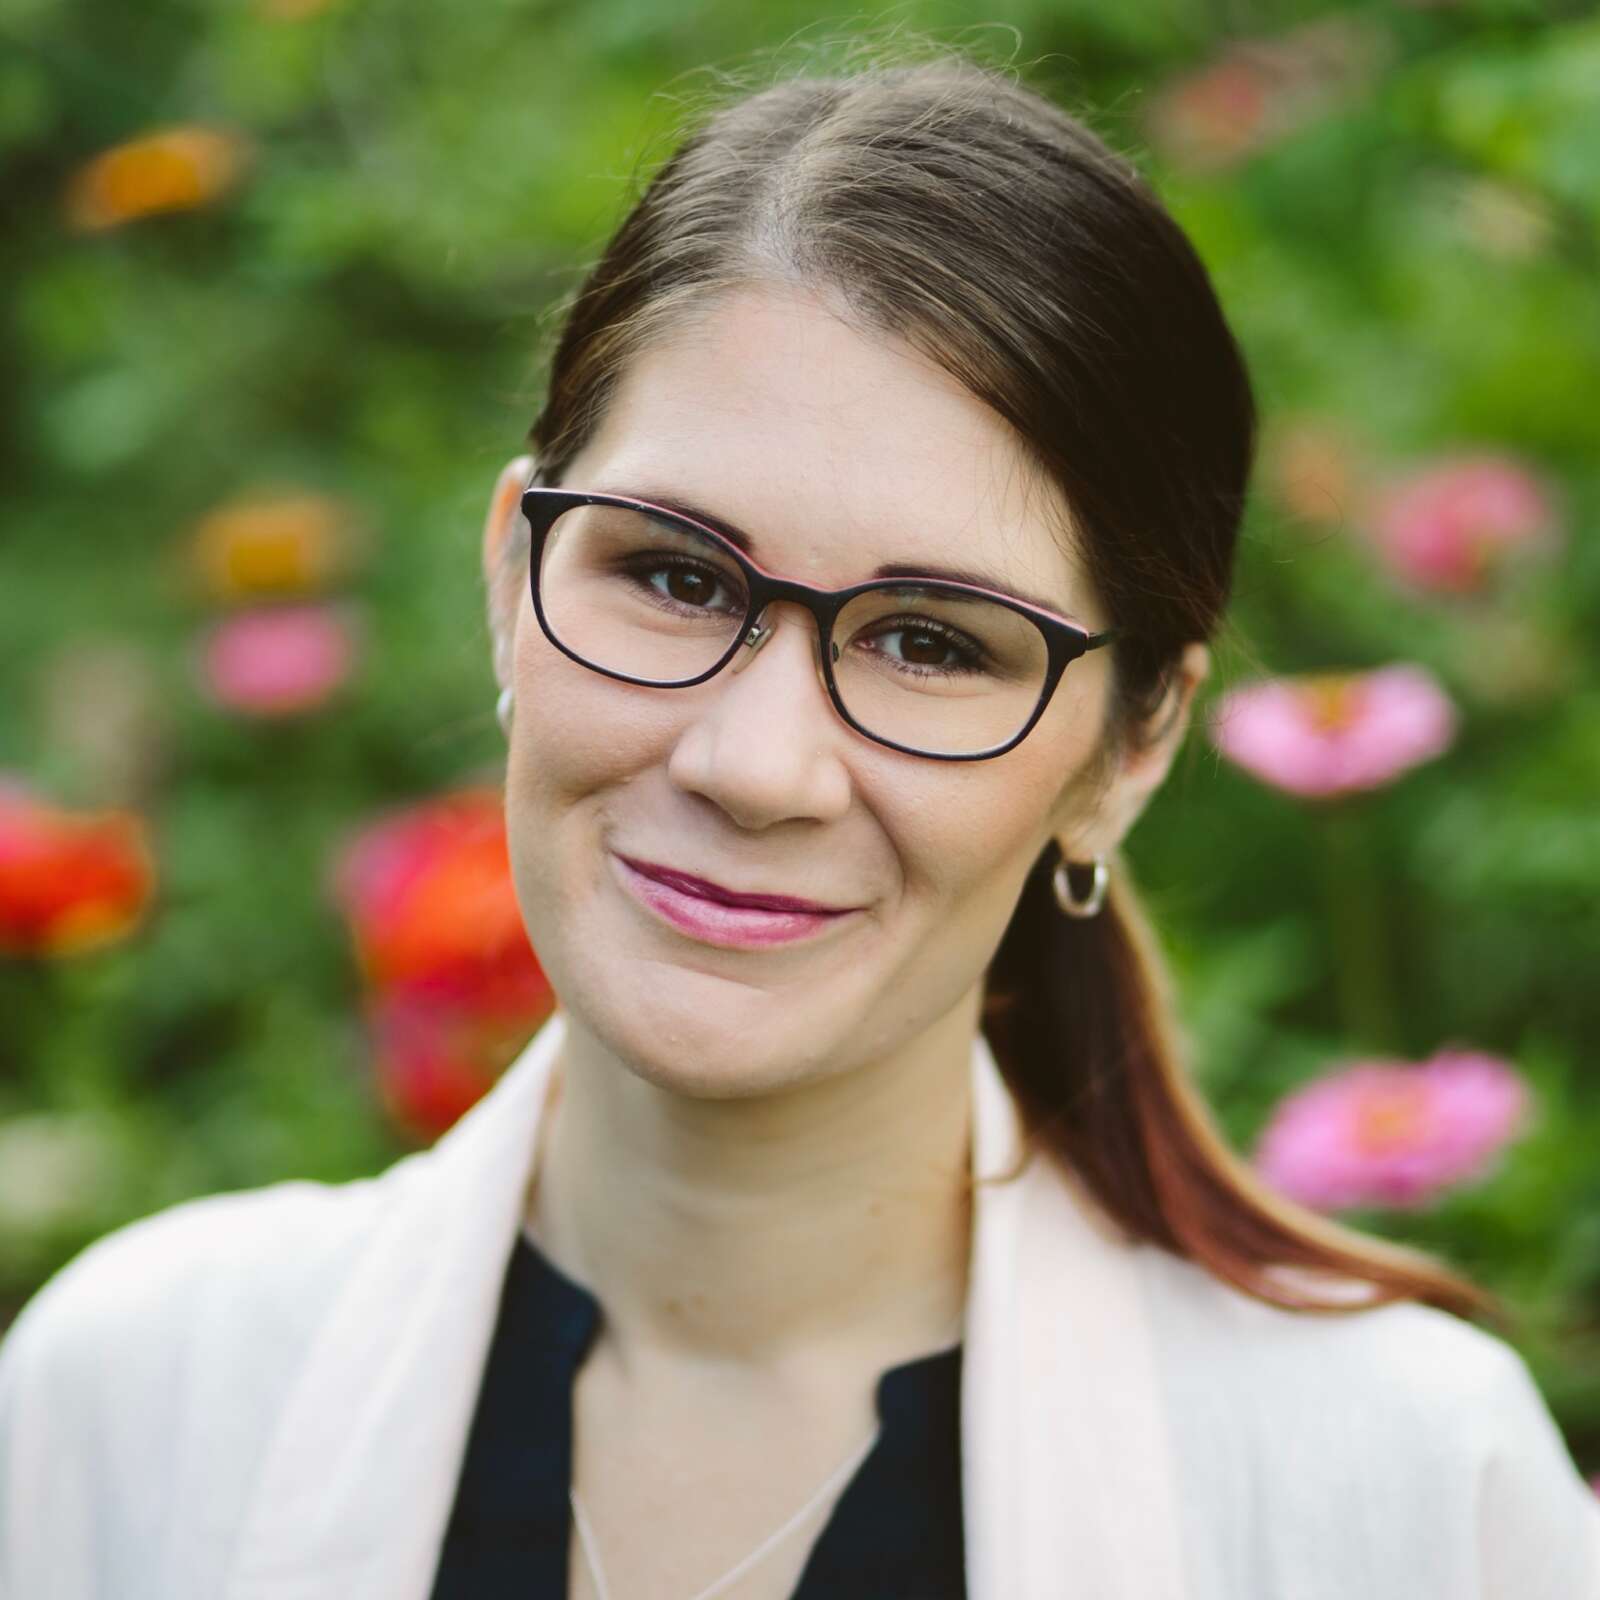 Kylee is a brown-haired female with glasses and hair in a ponytail. She is wearing a light pink blazer with an out of focus floral background.